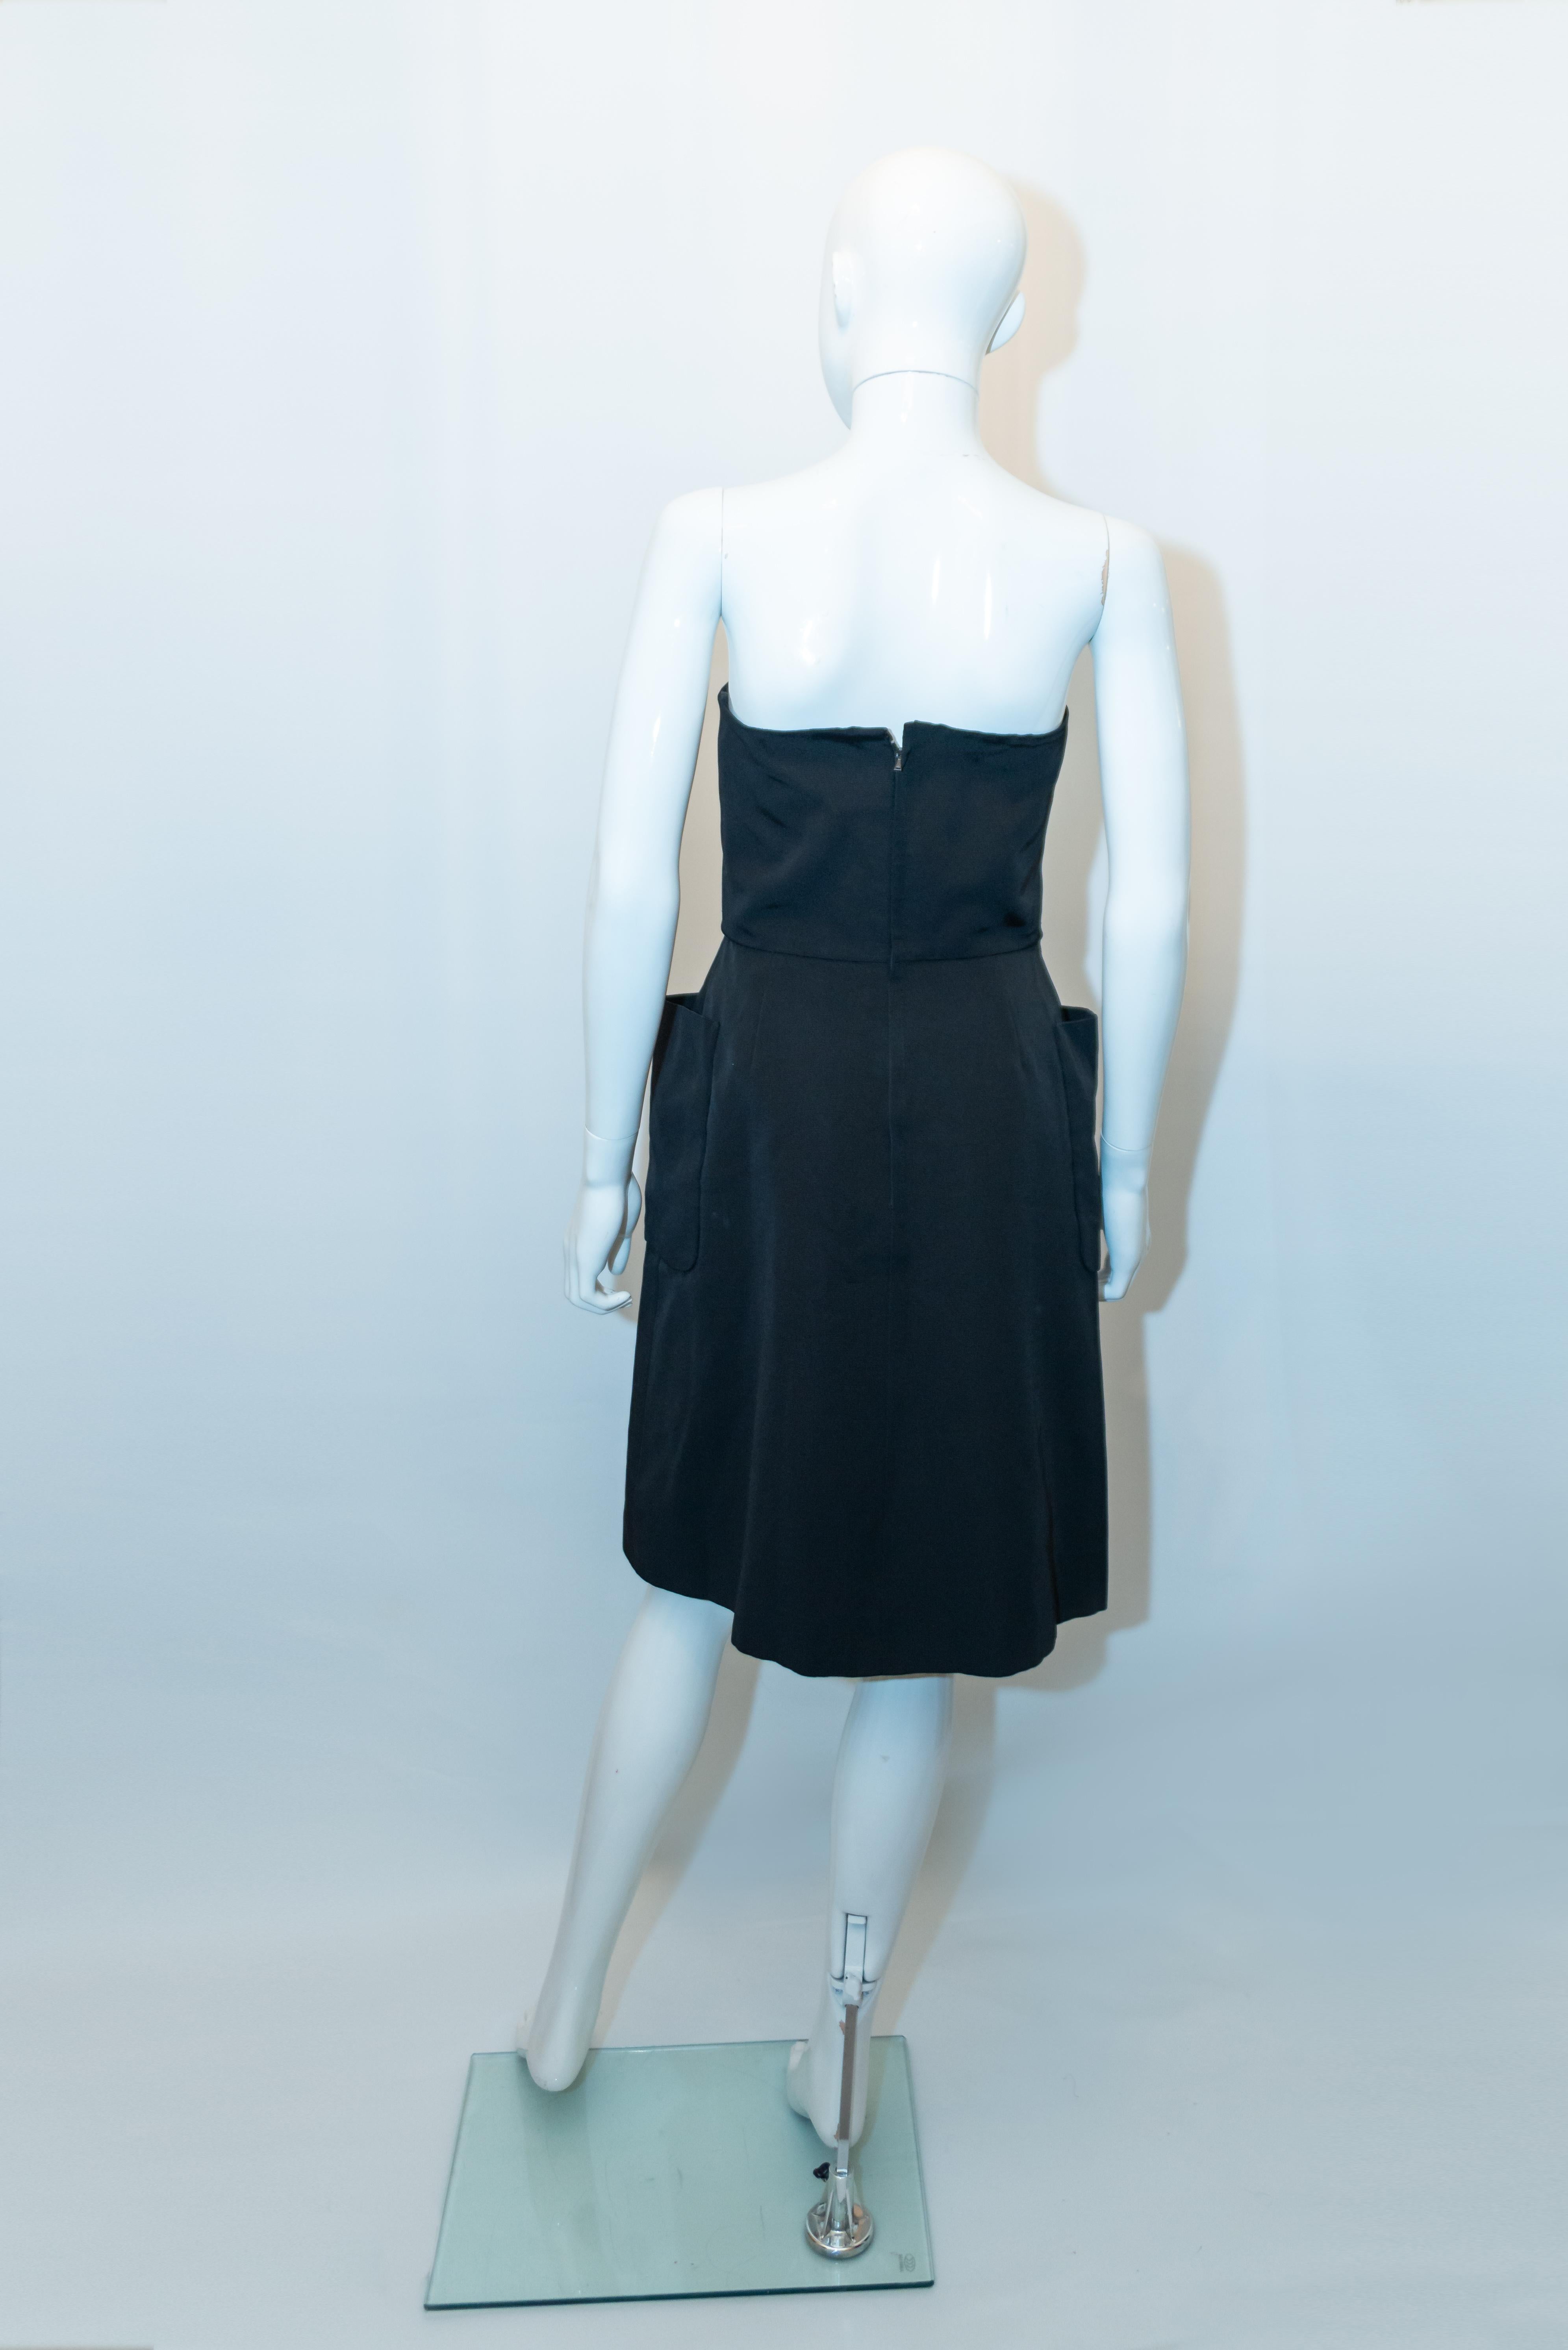 Nina Ricci Paris Black Cocktail Dress with Pockets In Good Condition For Sale In London, GB